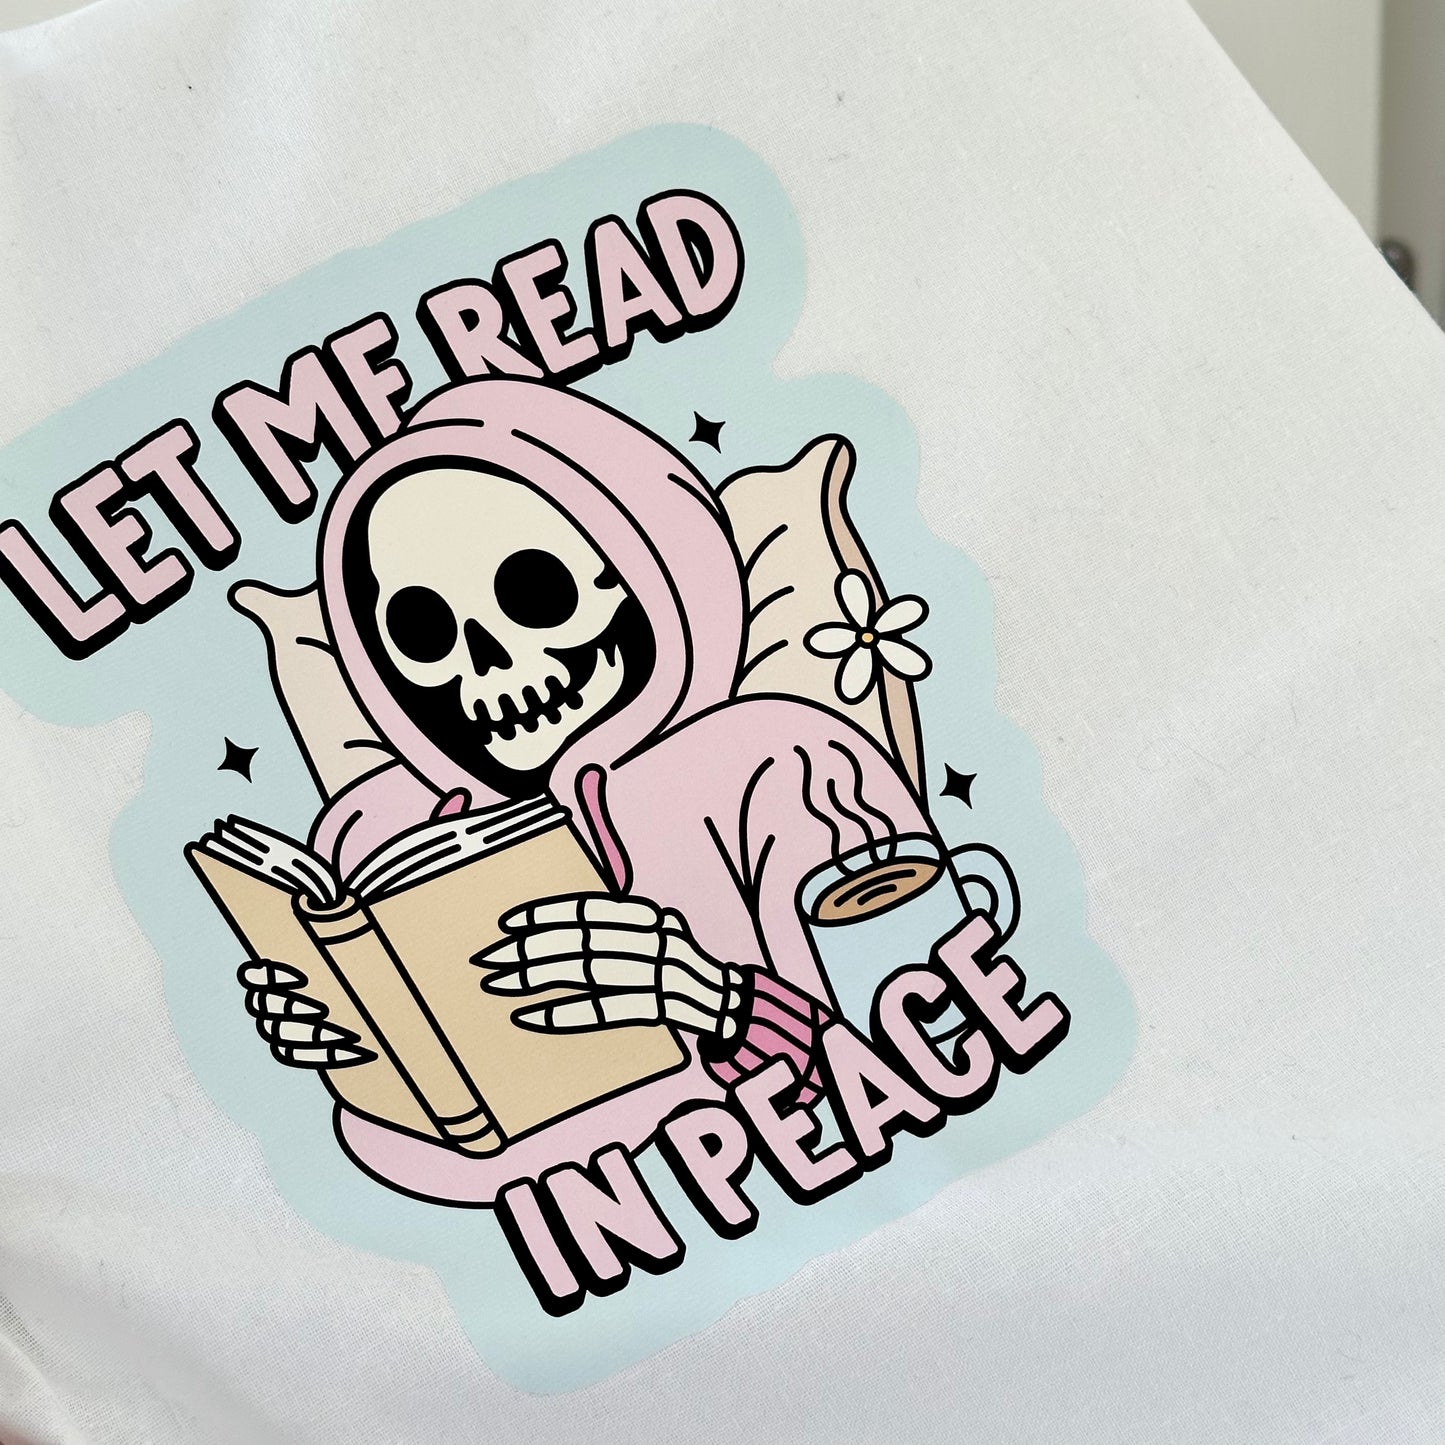 Let me Read in Peace - Cotton Tote Bag